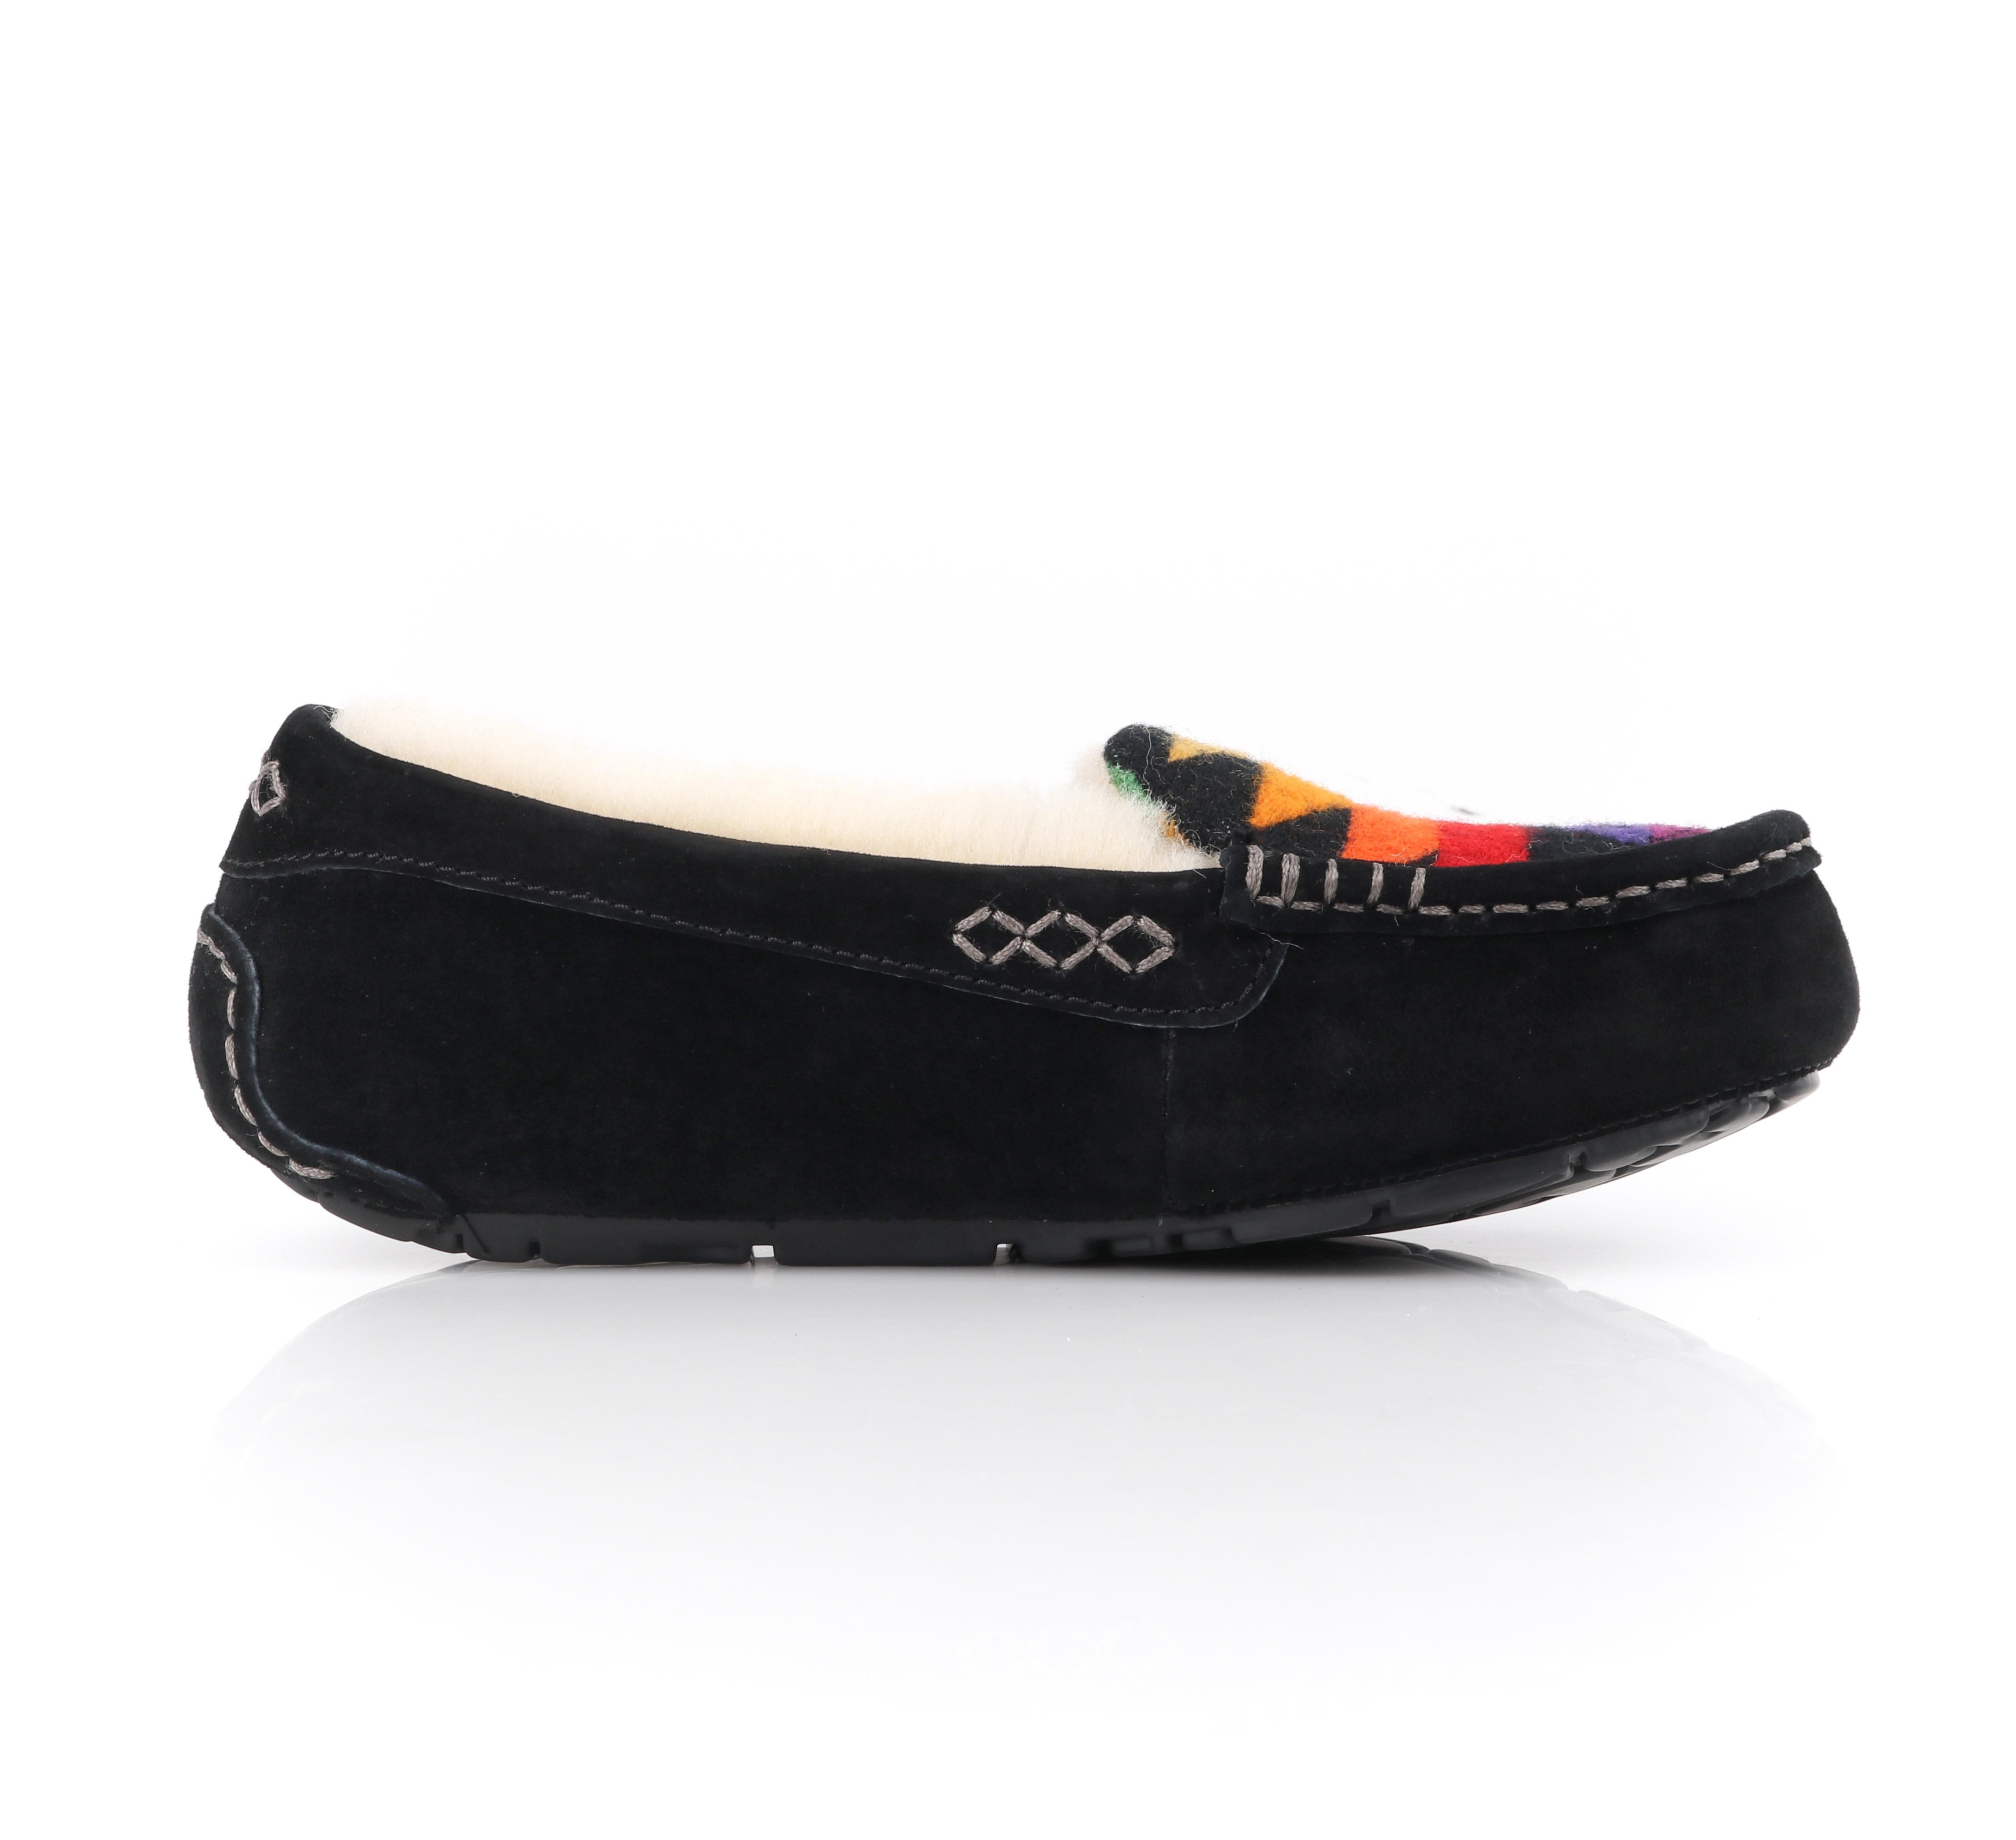 UGG AUSTRALIA Pendleton 2014 Rainbow Black Suede Wool Print Moccasin Slippers In Good Condition For Sale In Thiensville, WI